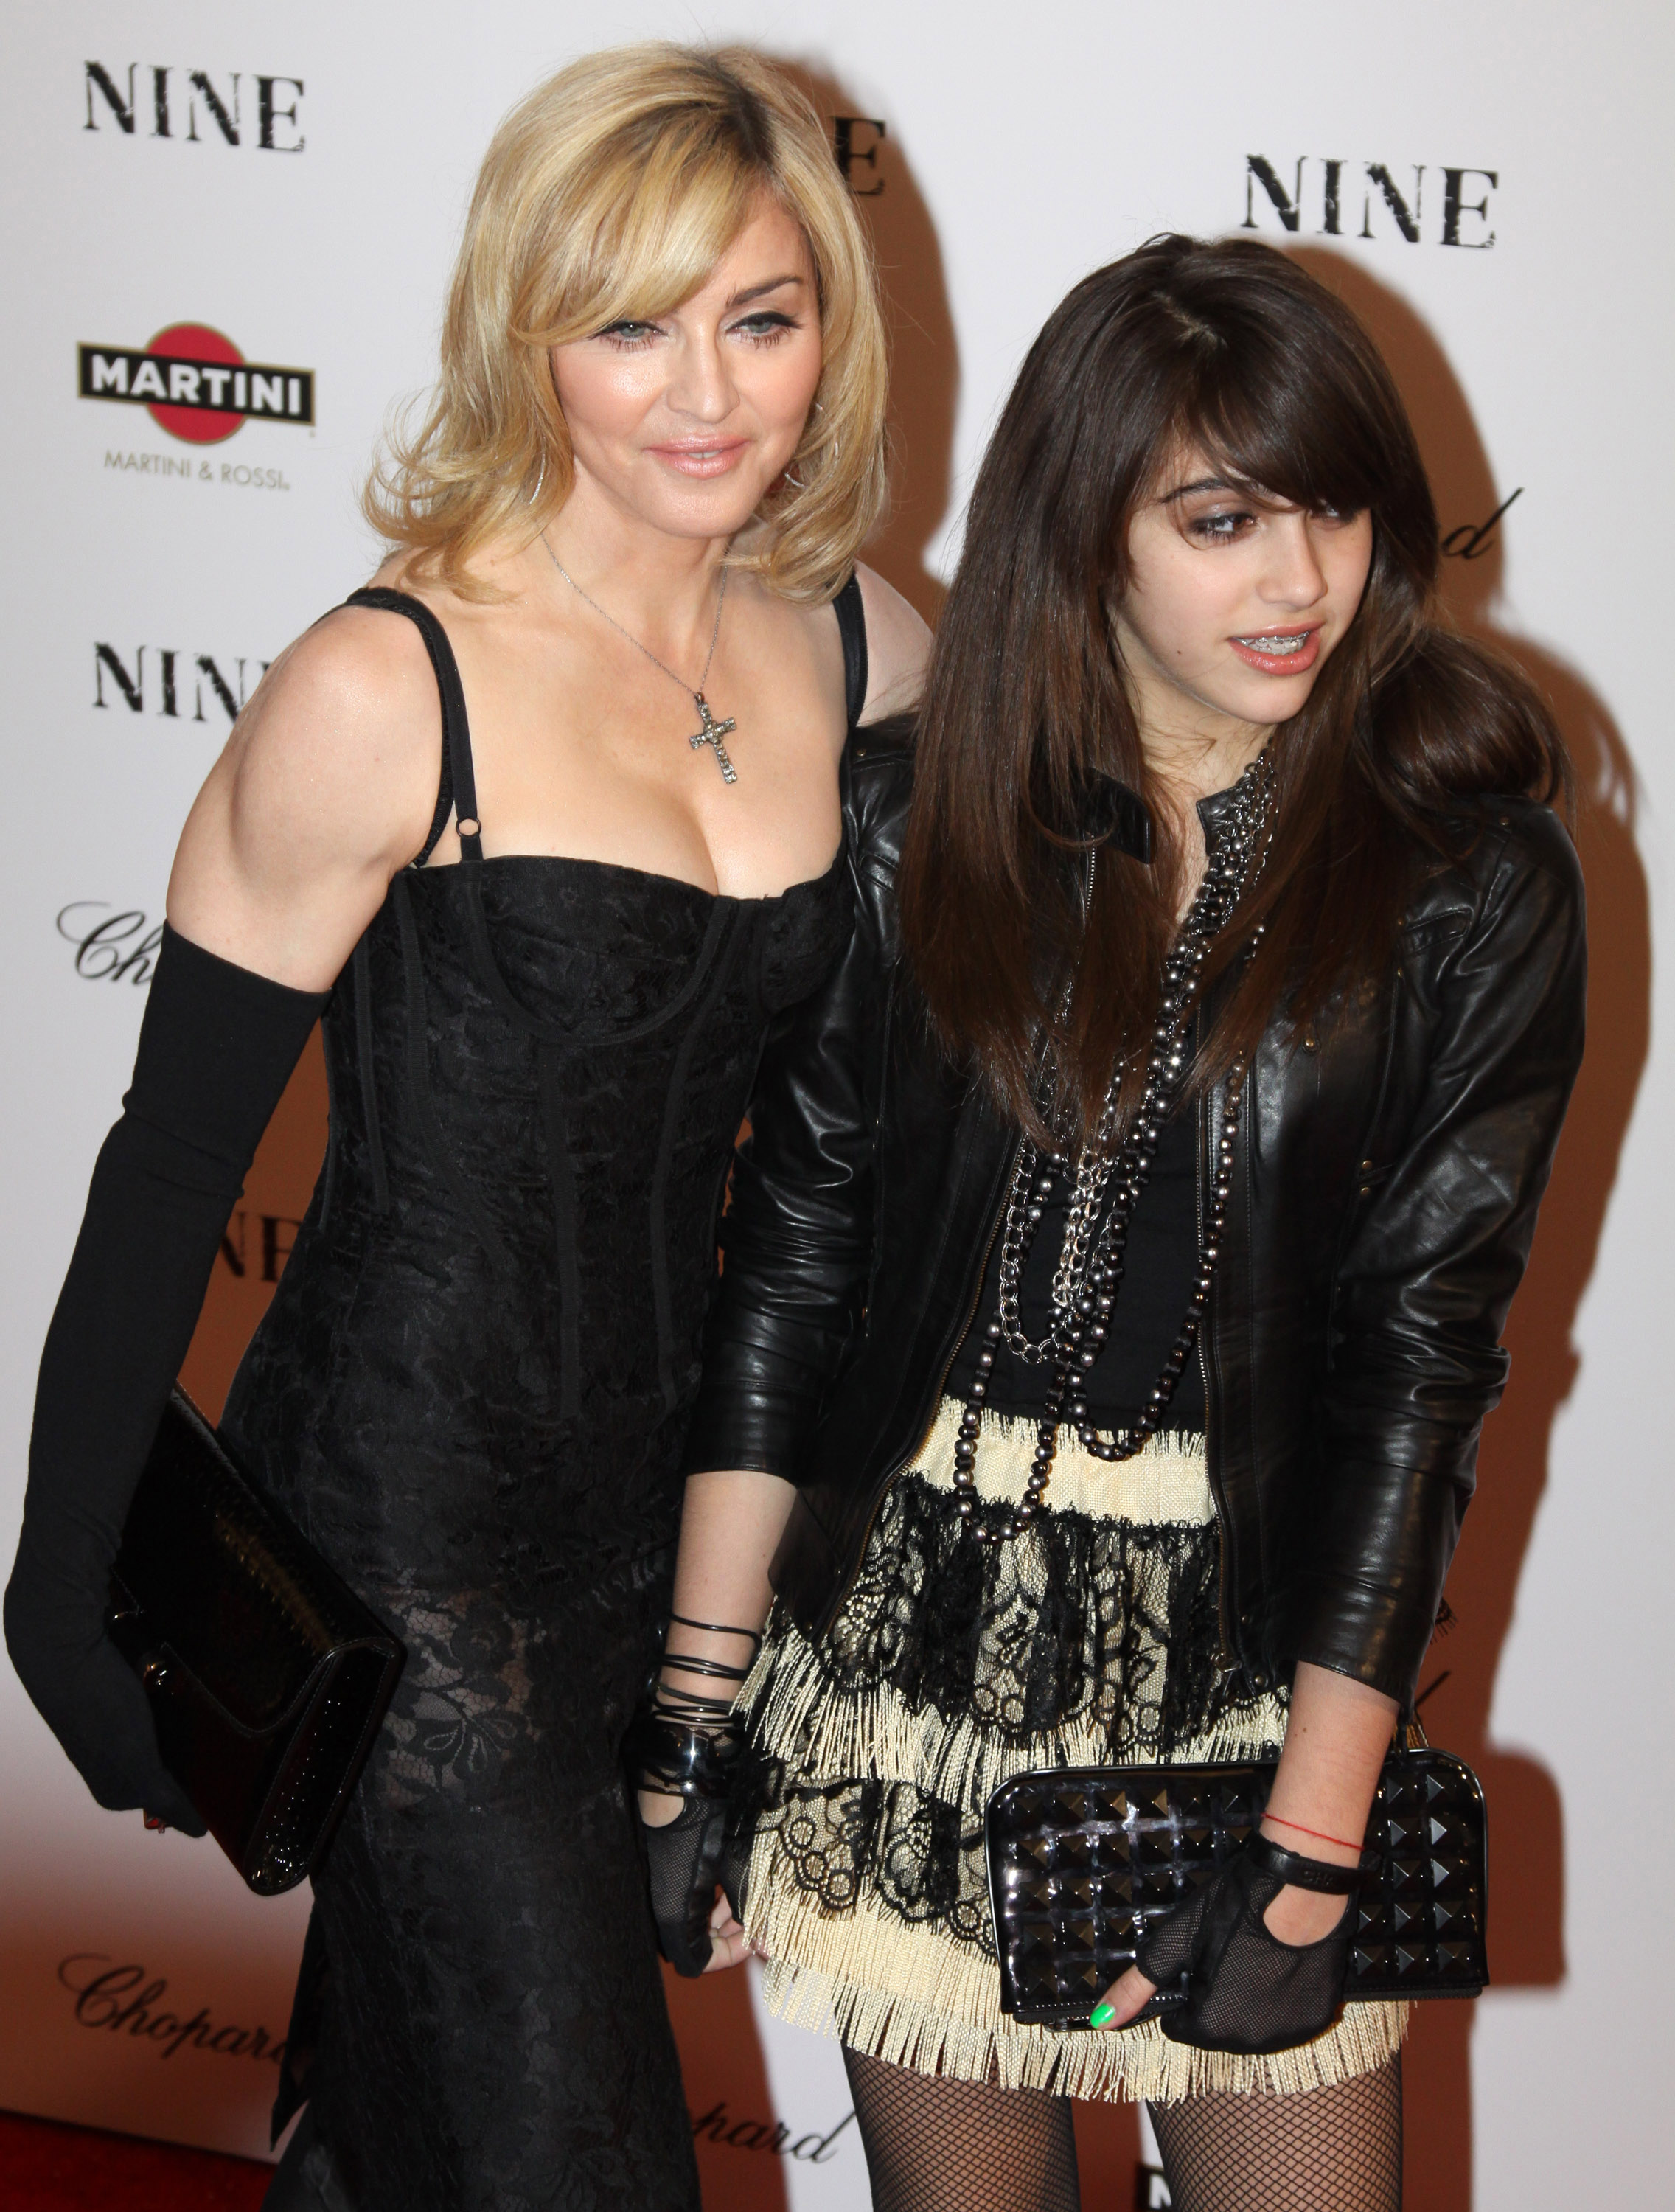 Madonna and her daughter Lourdes "Lola" Leon attend the premiere of "Nine" on December 15, 2009 in New York City | Source: Getty Images